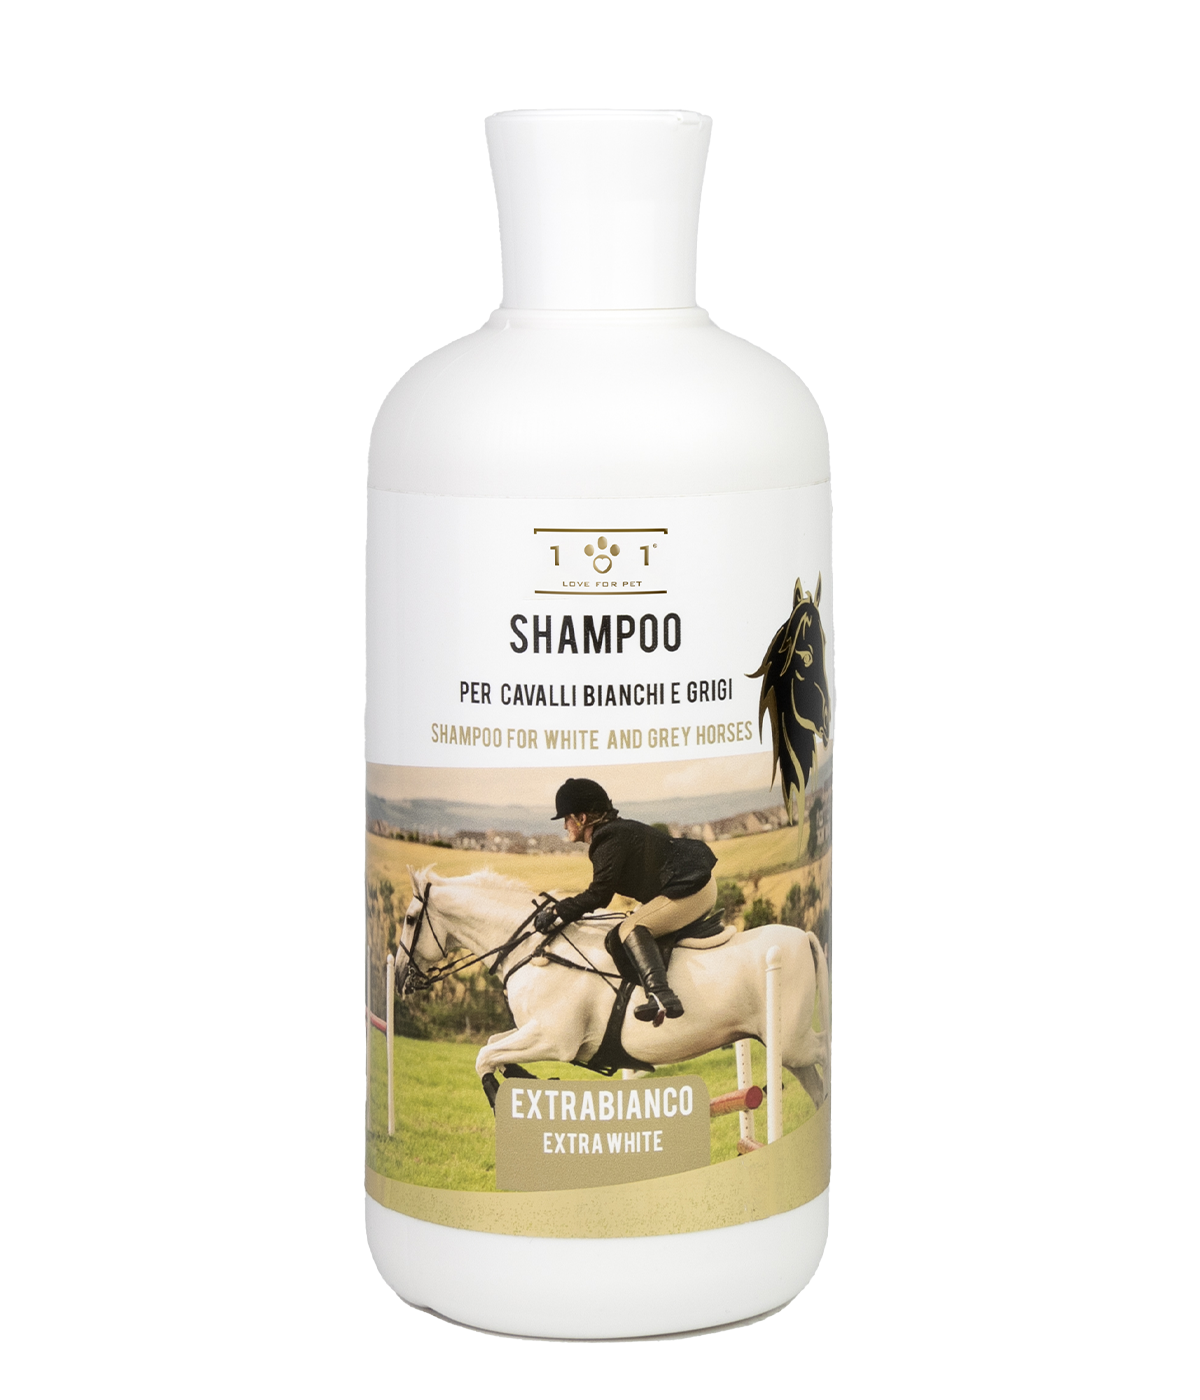 GENTLE SHAMPOO FOR WHITE AND GREY HORSES